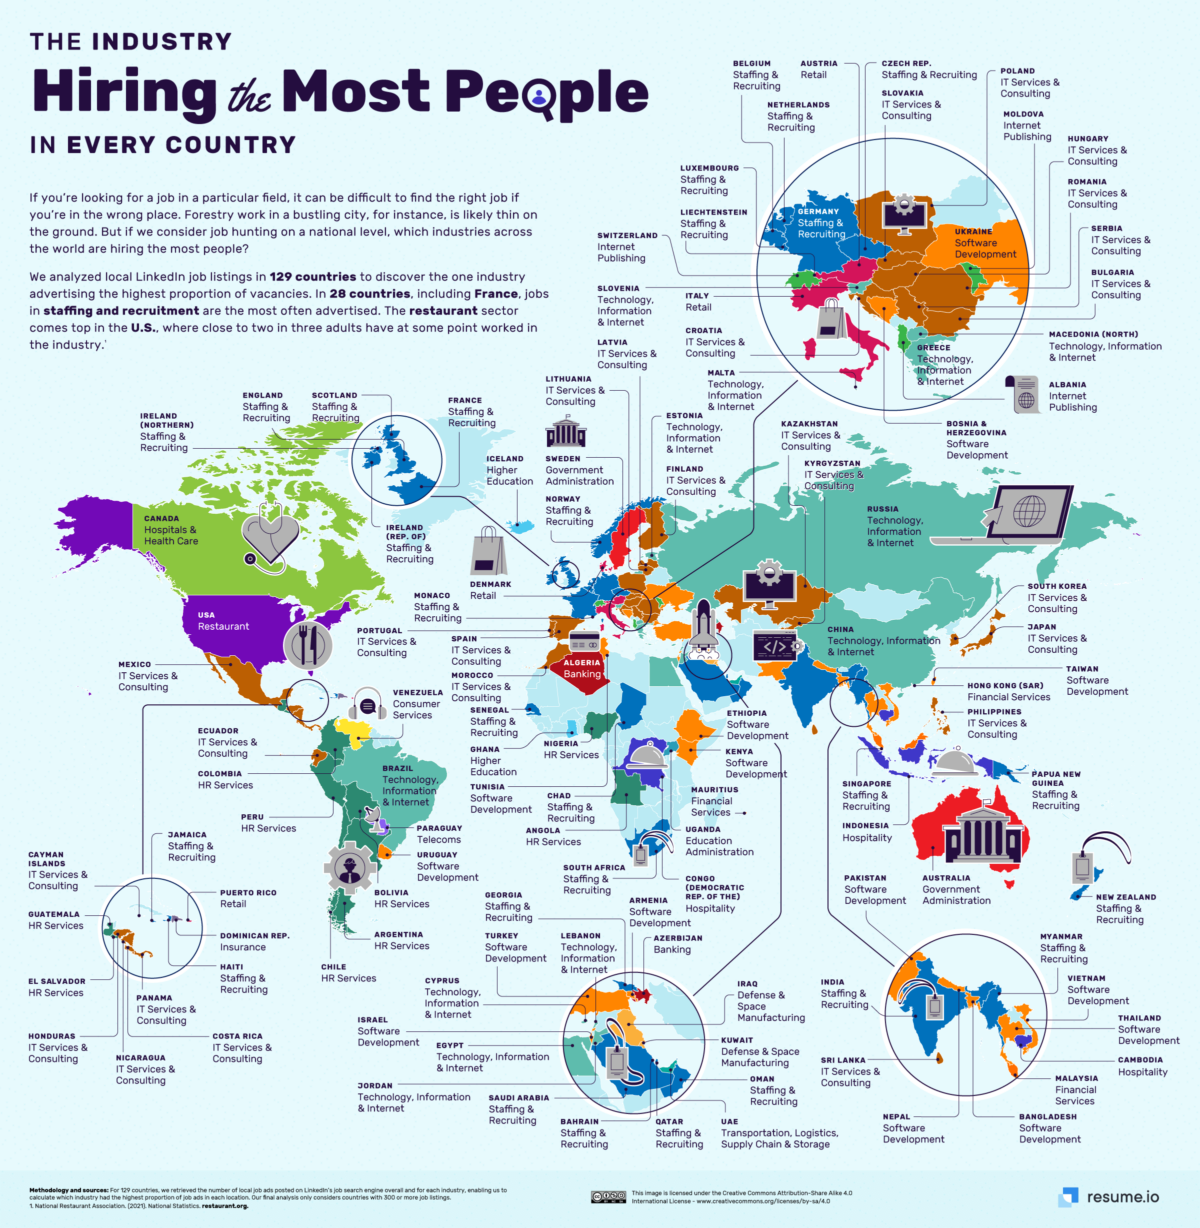 A Map Showing The Industry Hiring the Most People In Every Country